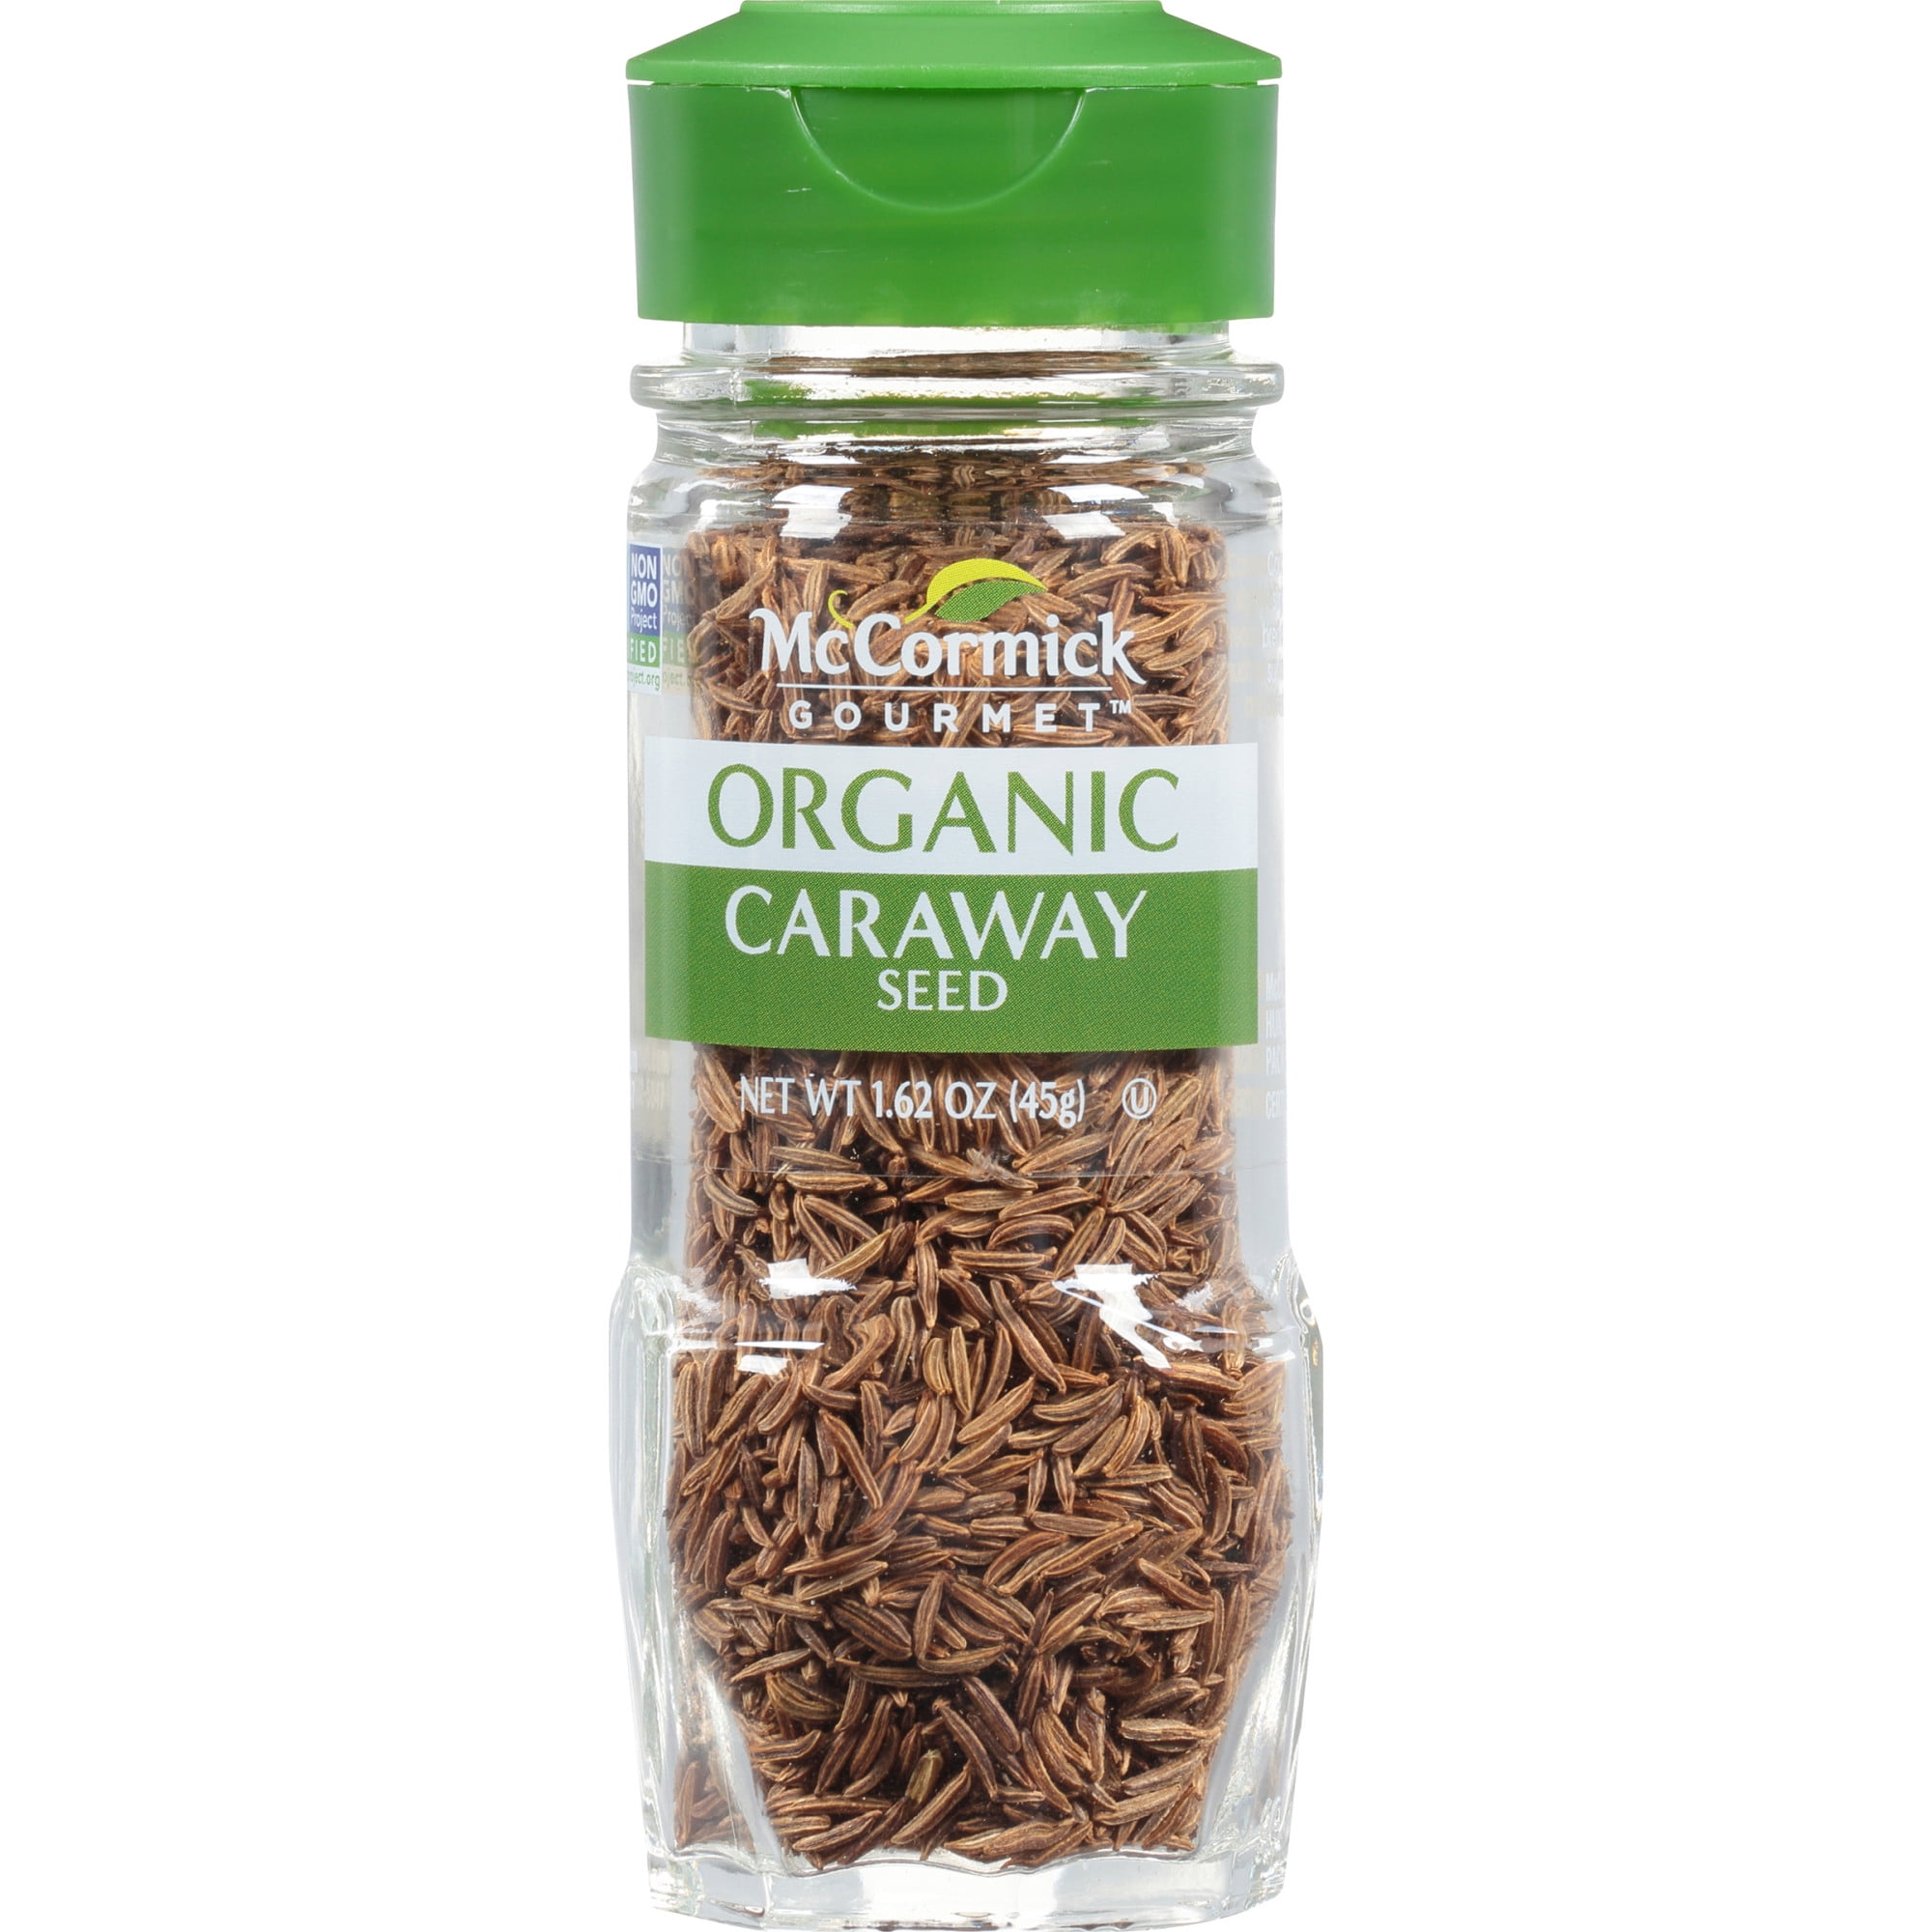 Caraway is now selling all its products at The Container Store